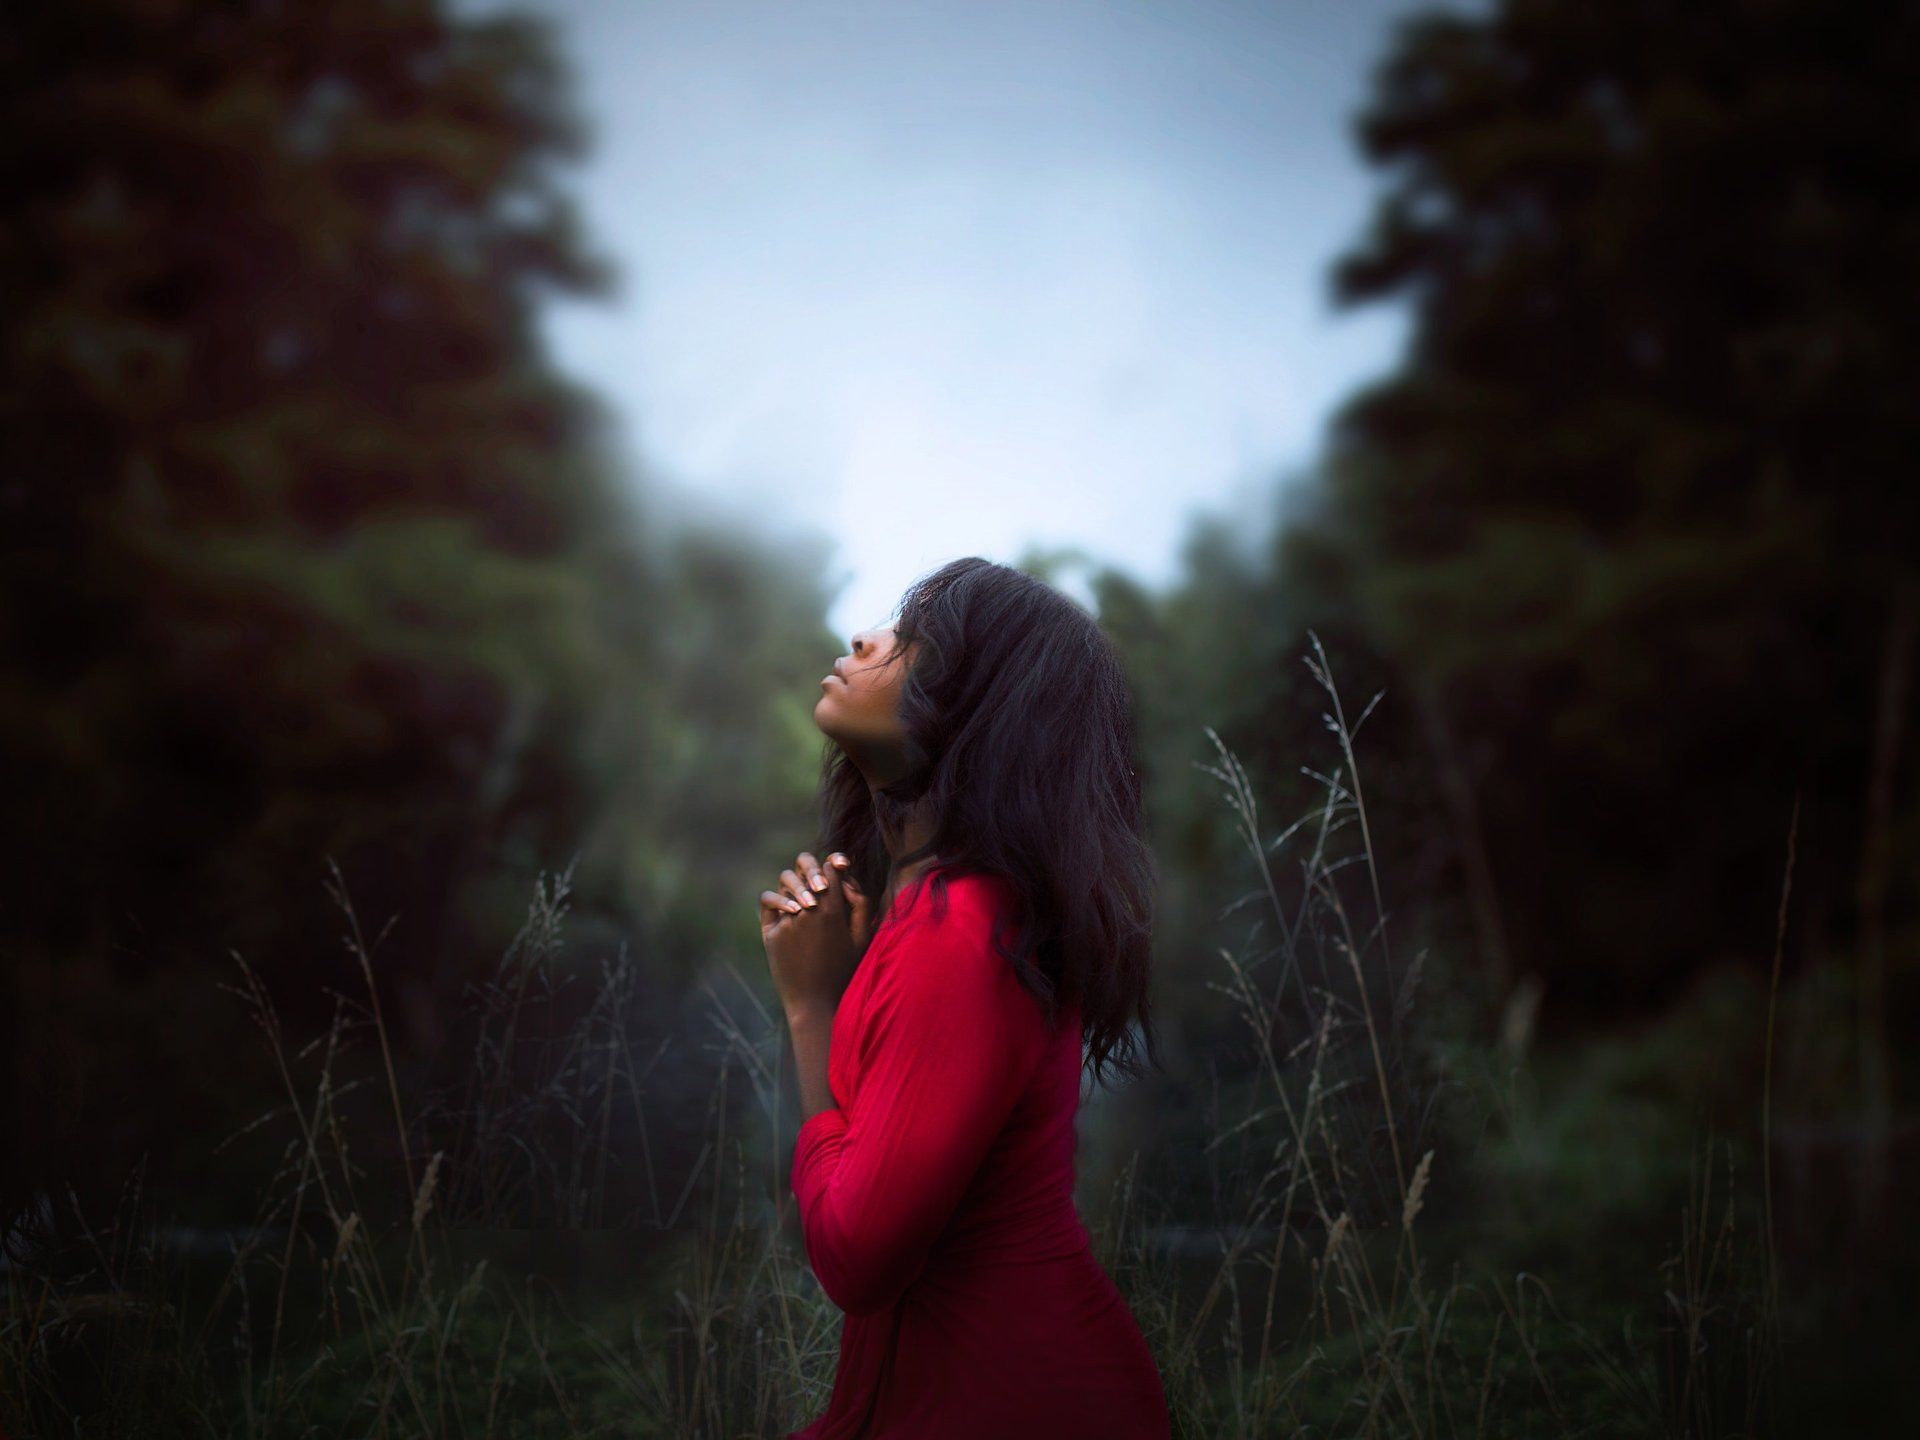 young woman praying in a field with trees looking up to the sky